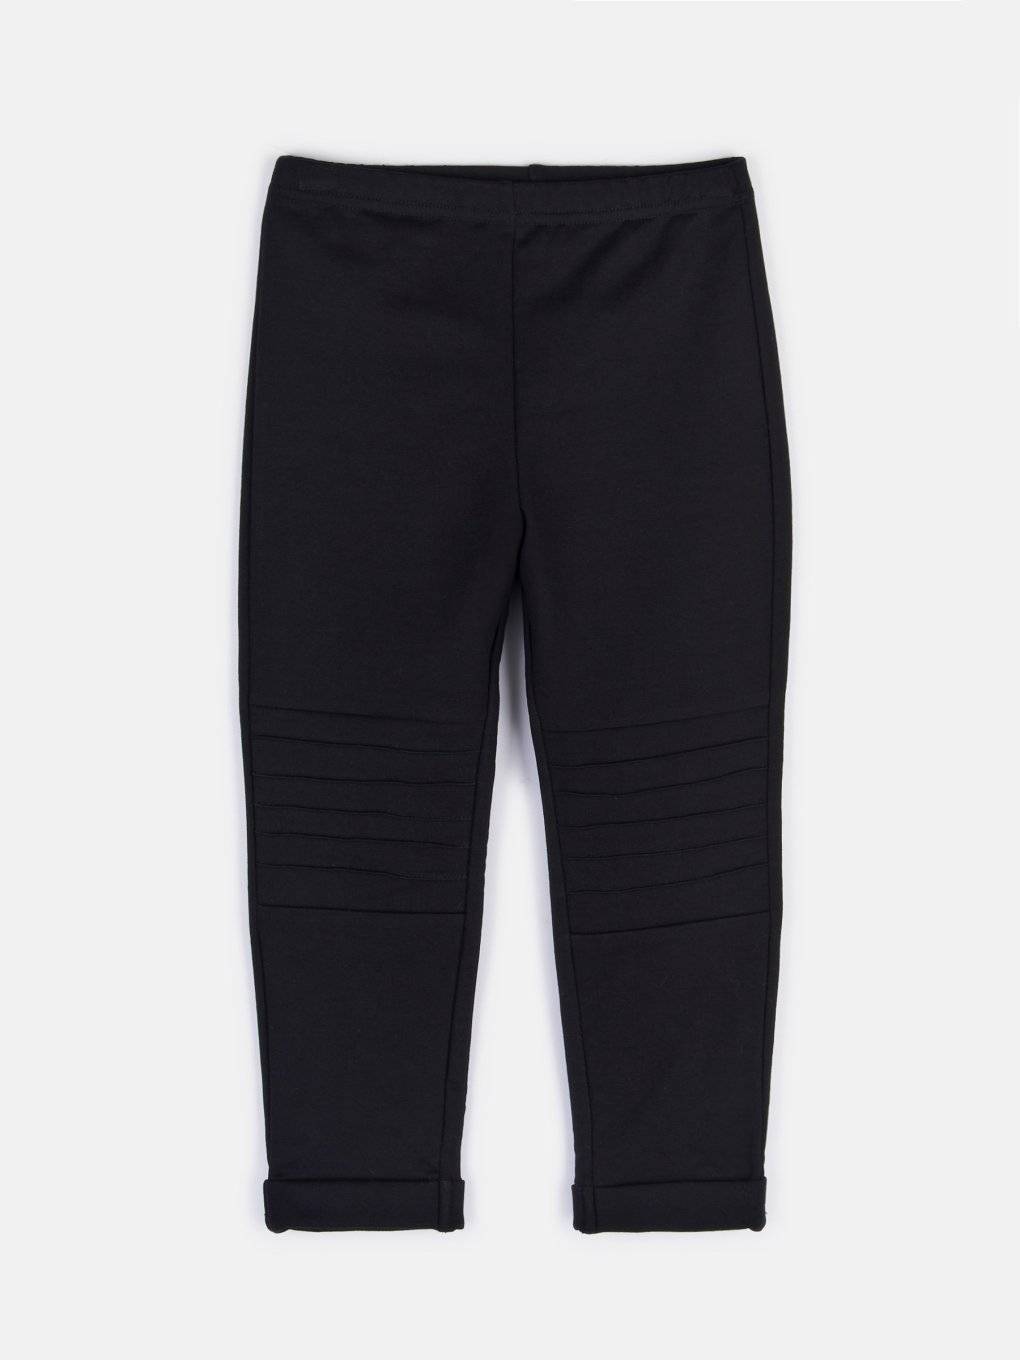 Biker leggings with stitching on knees